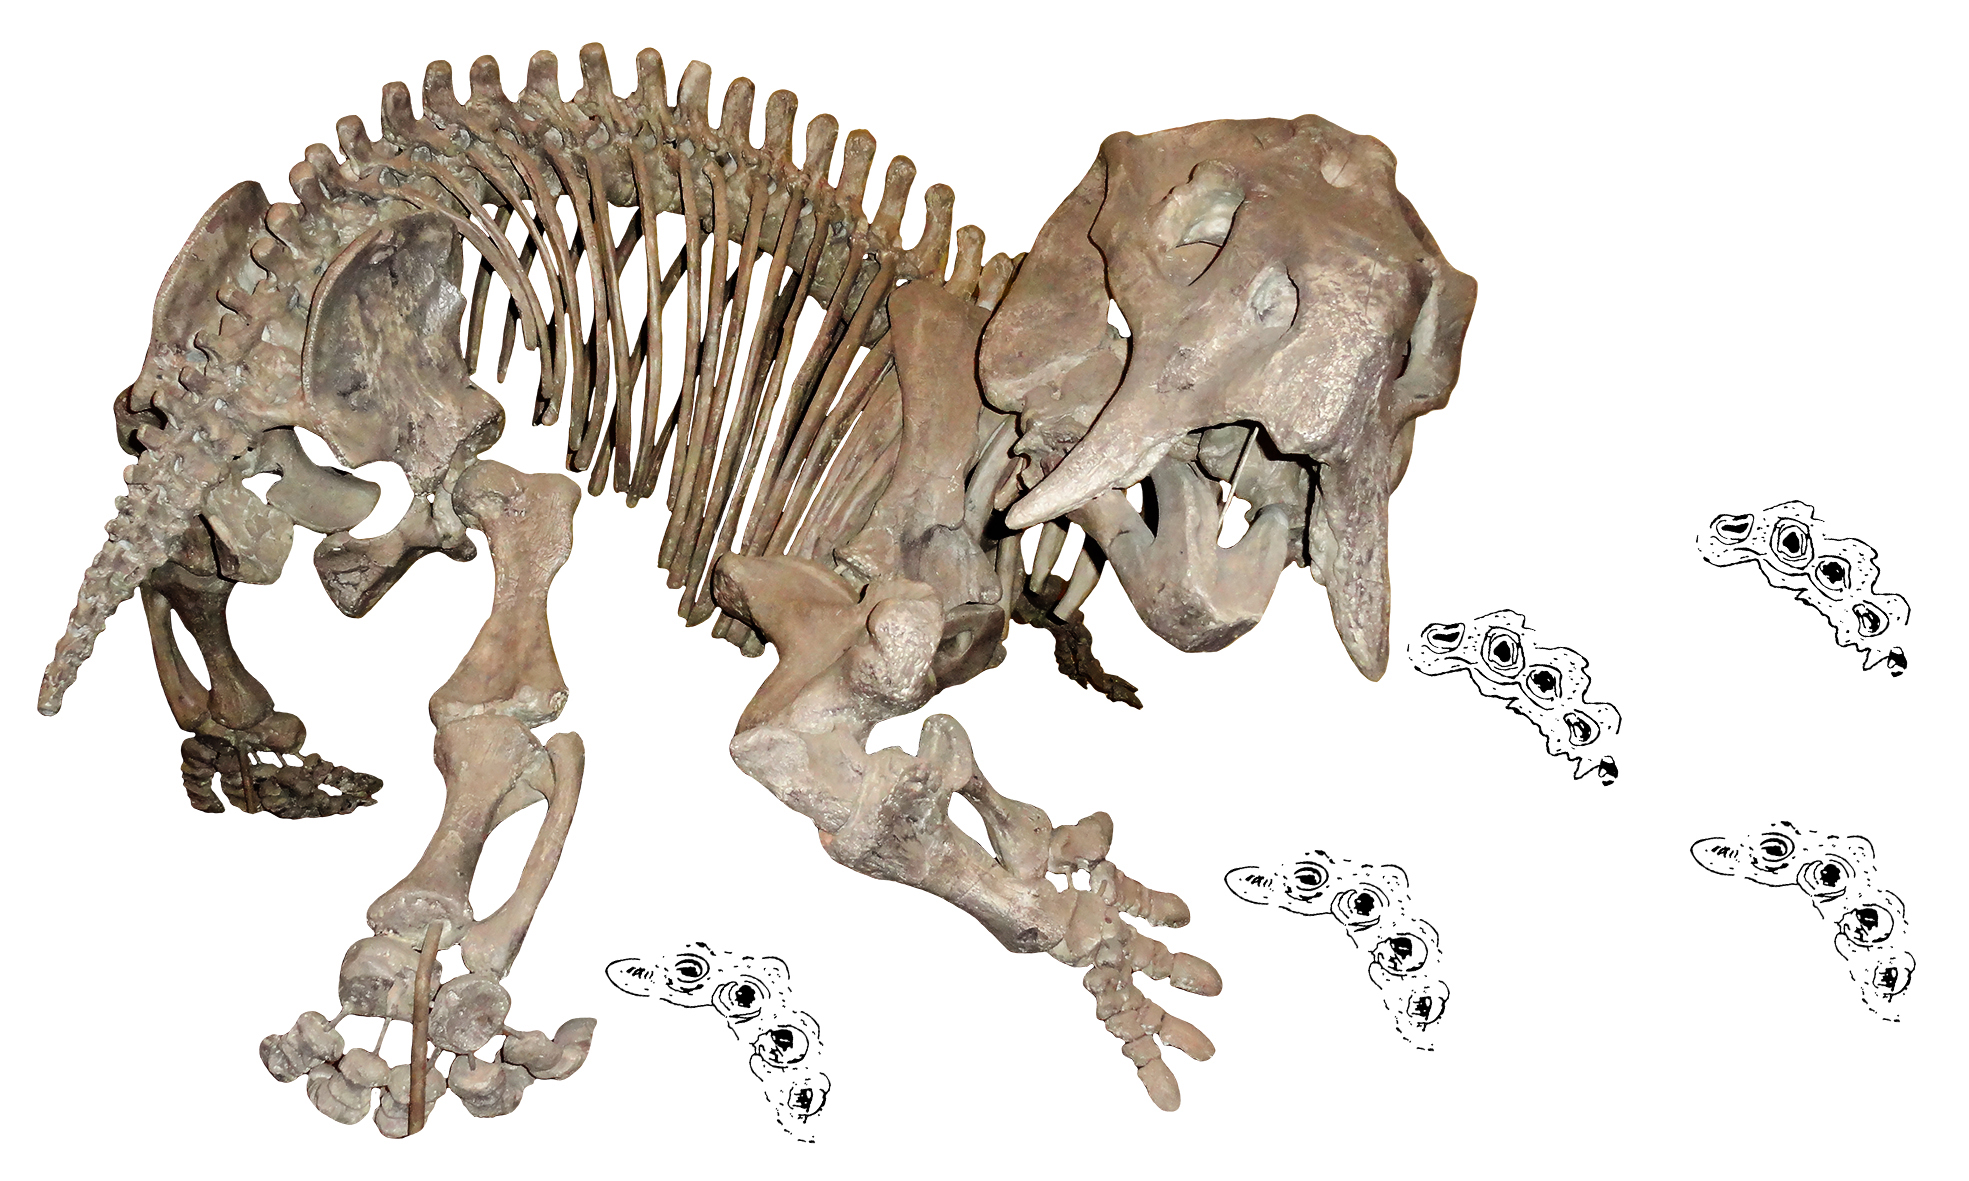 Skeleton of the dicynodont Placerias, a close relative of the newly-discovered Pentasaurus, with dicynodont trackways (Pentasauropus).